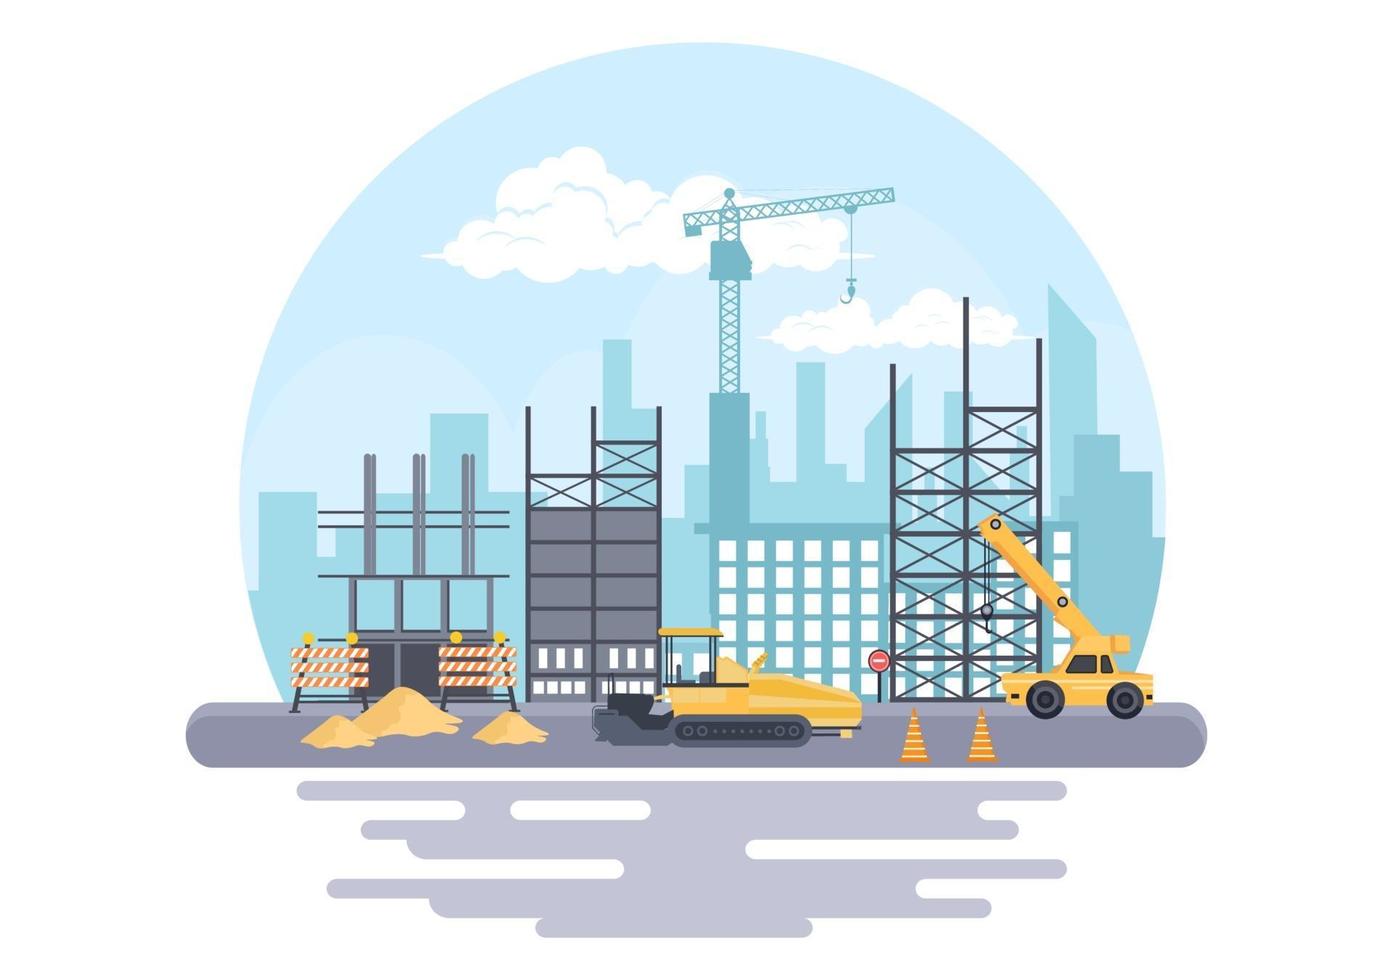 Construction of Real Estate Vector